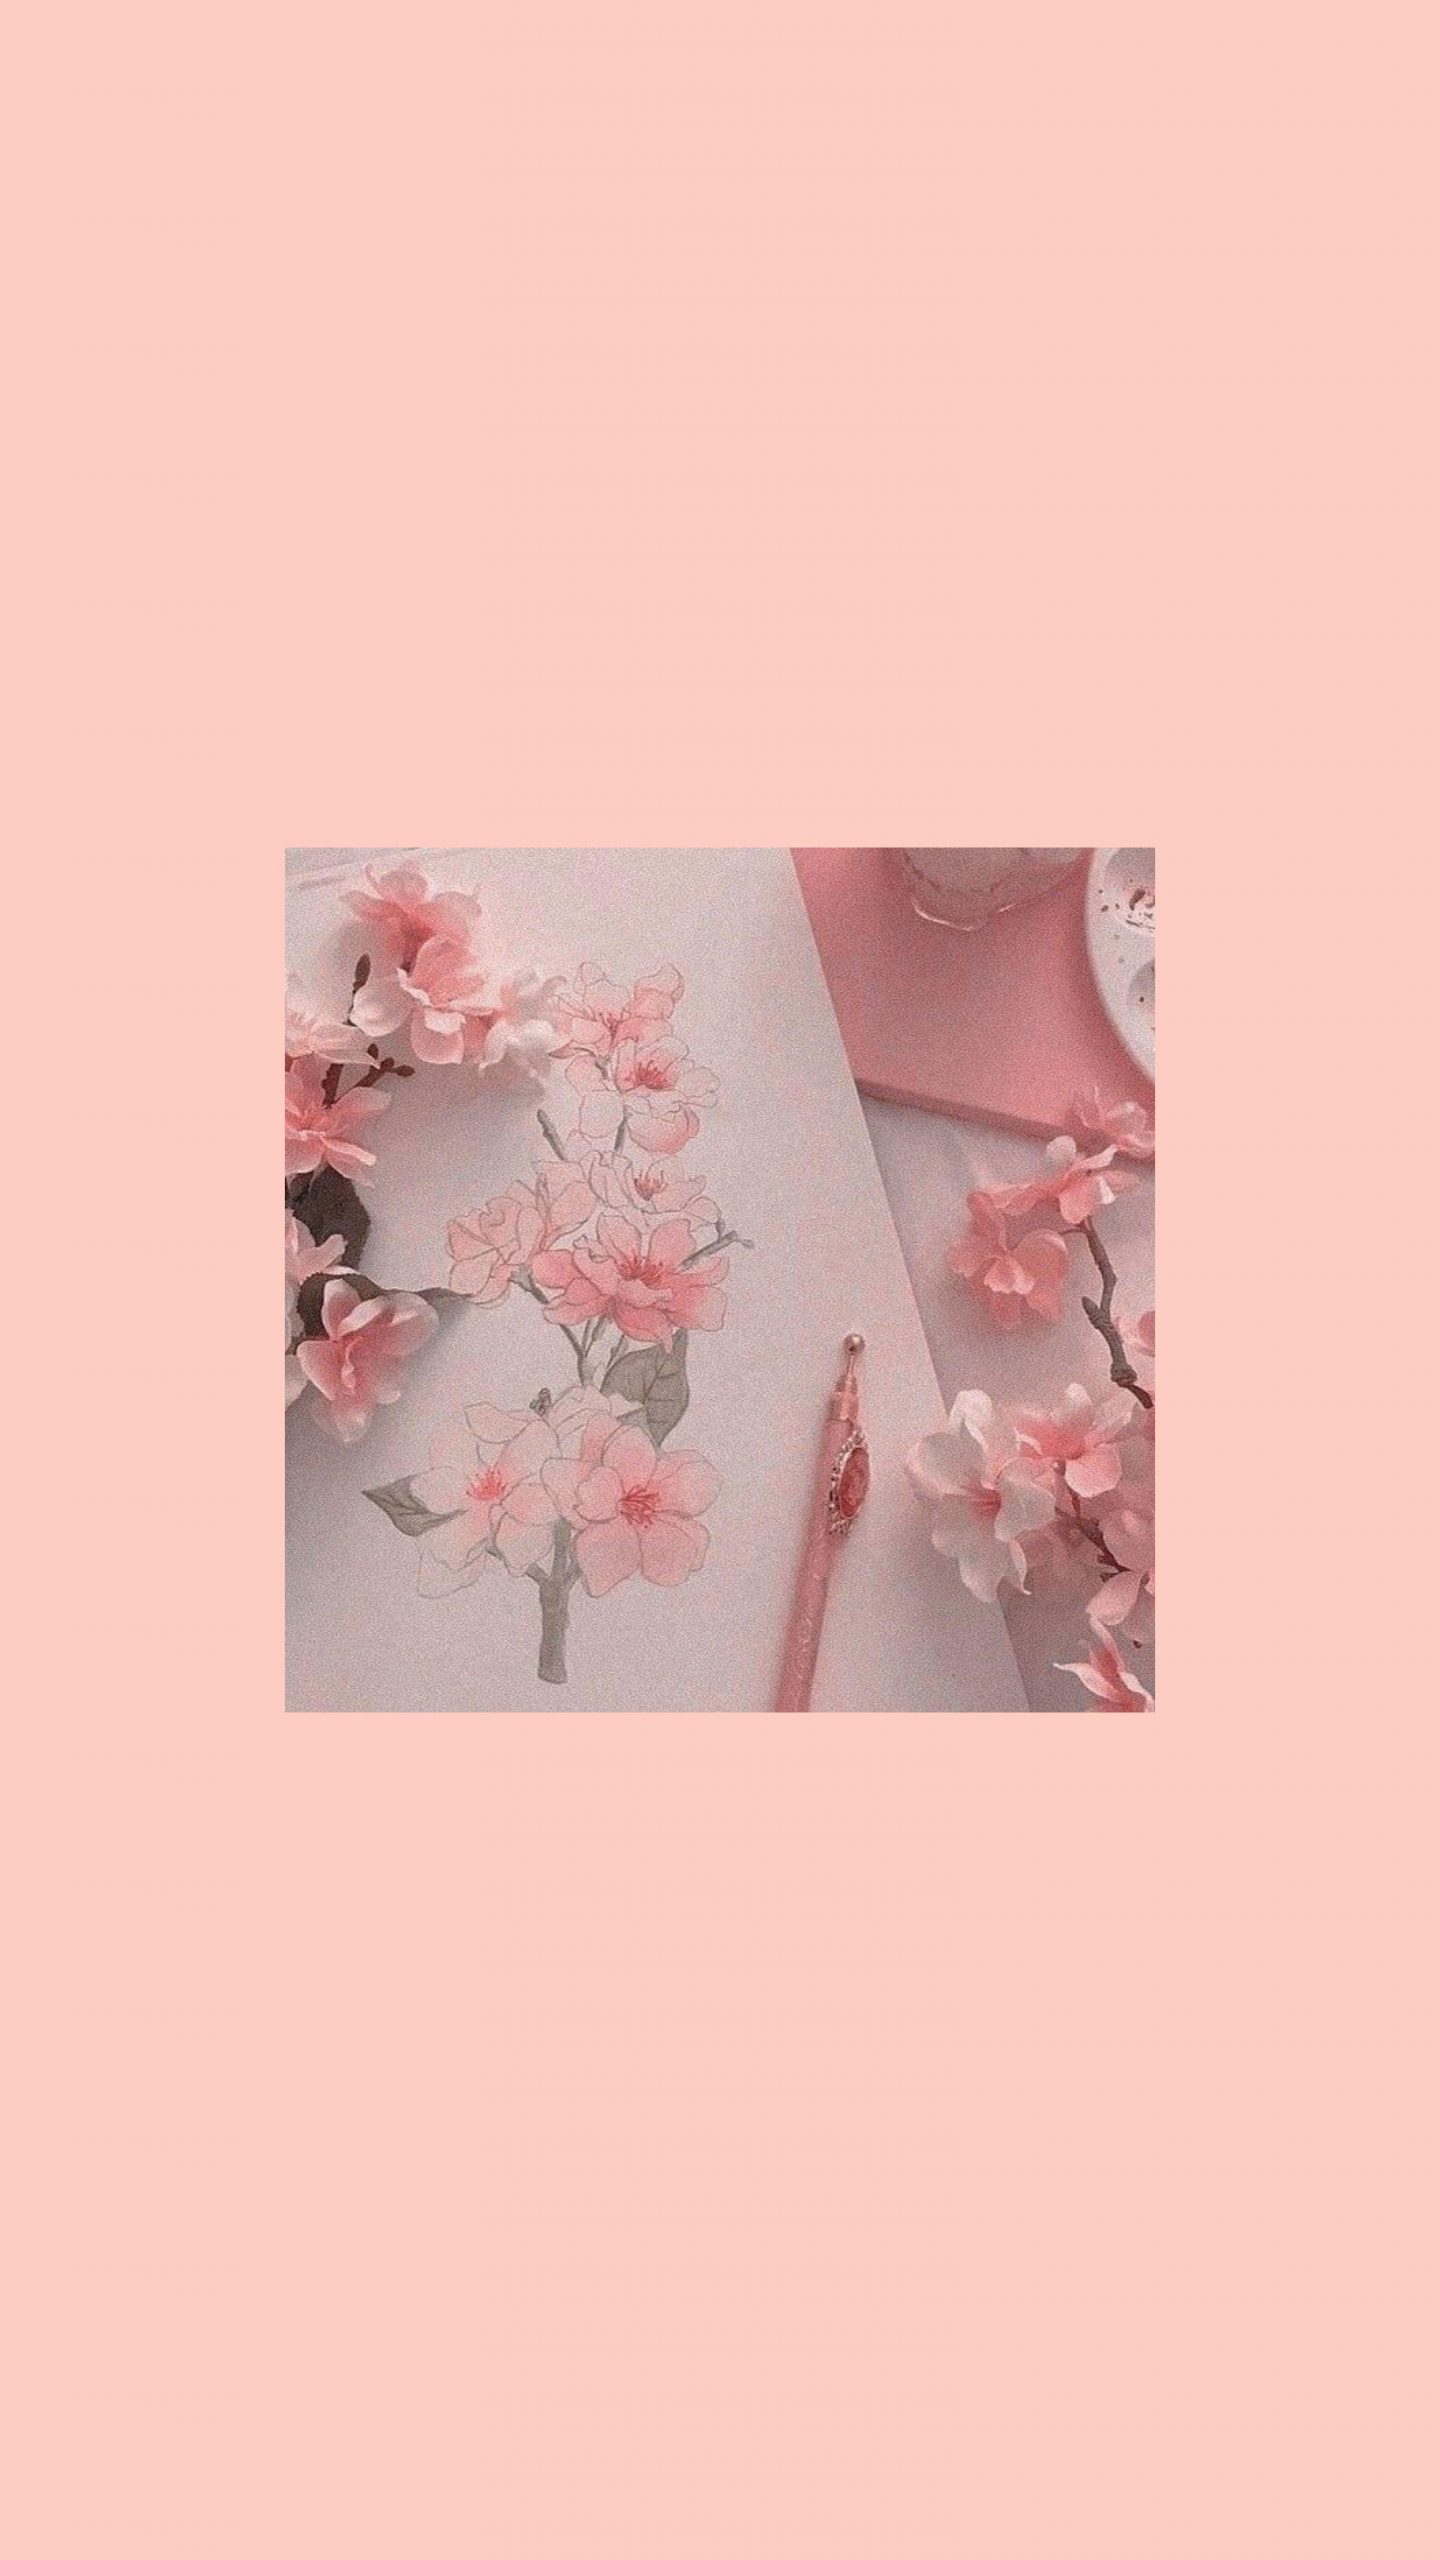 Peach Aesthetic Wallpapers